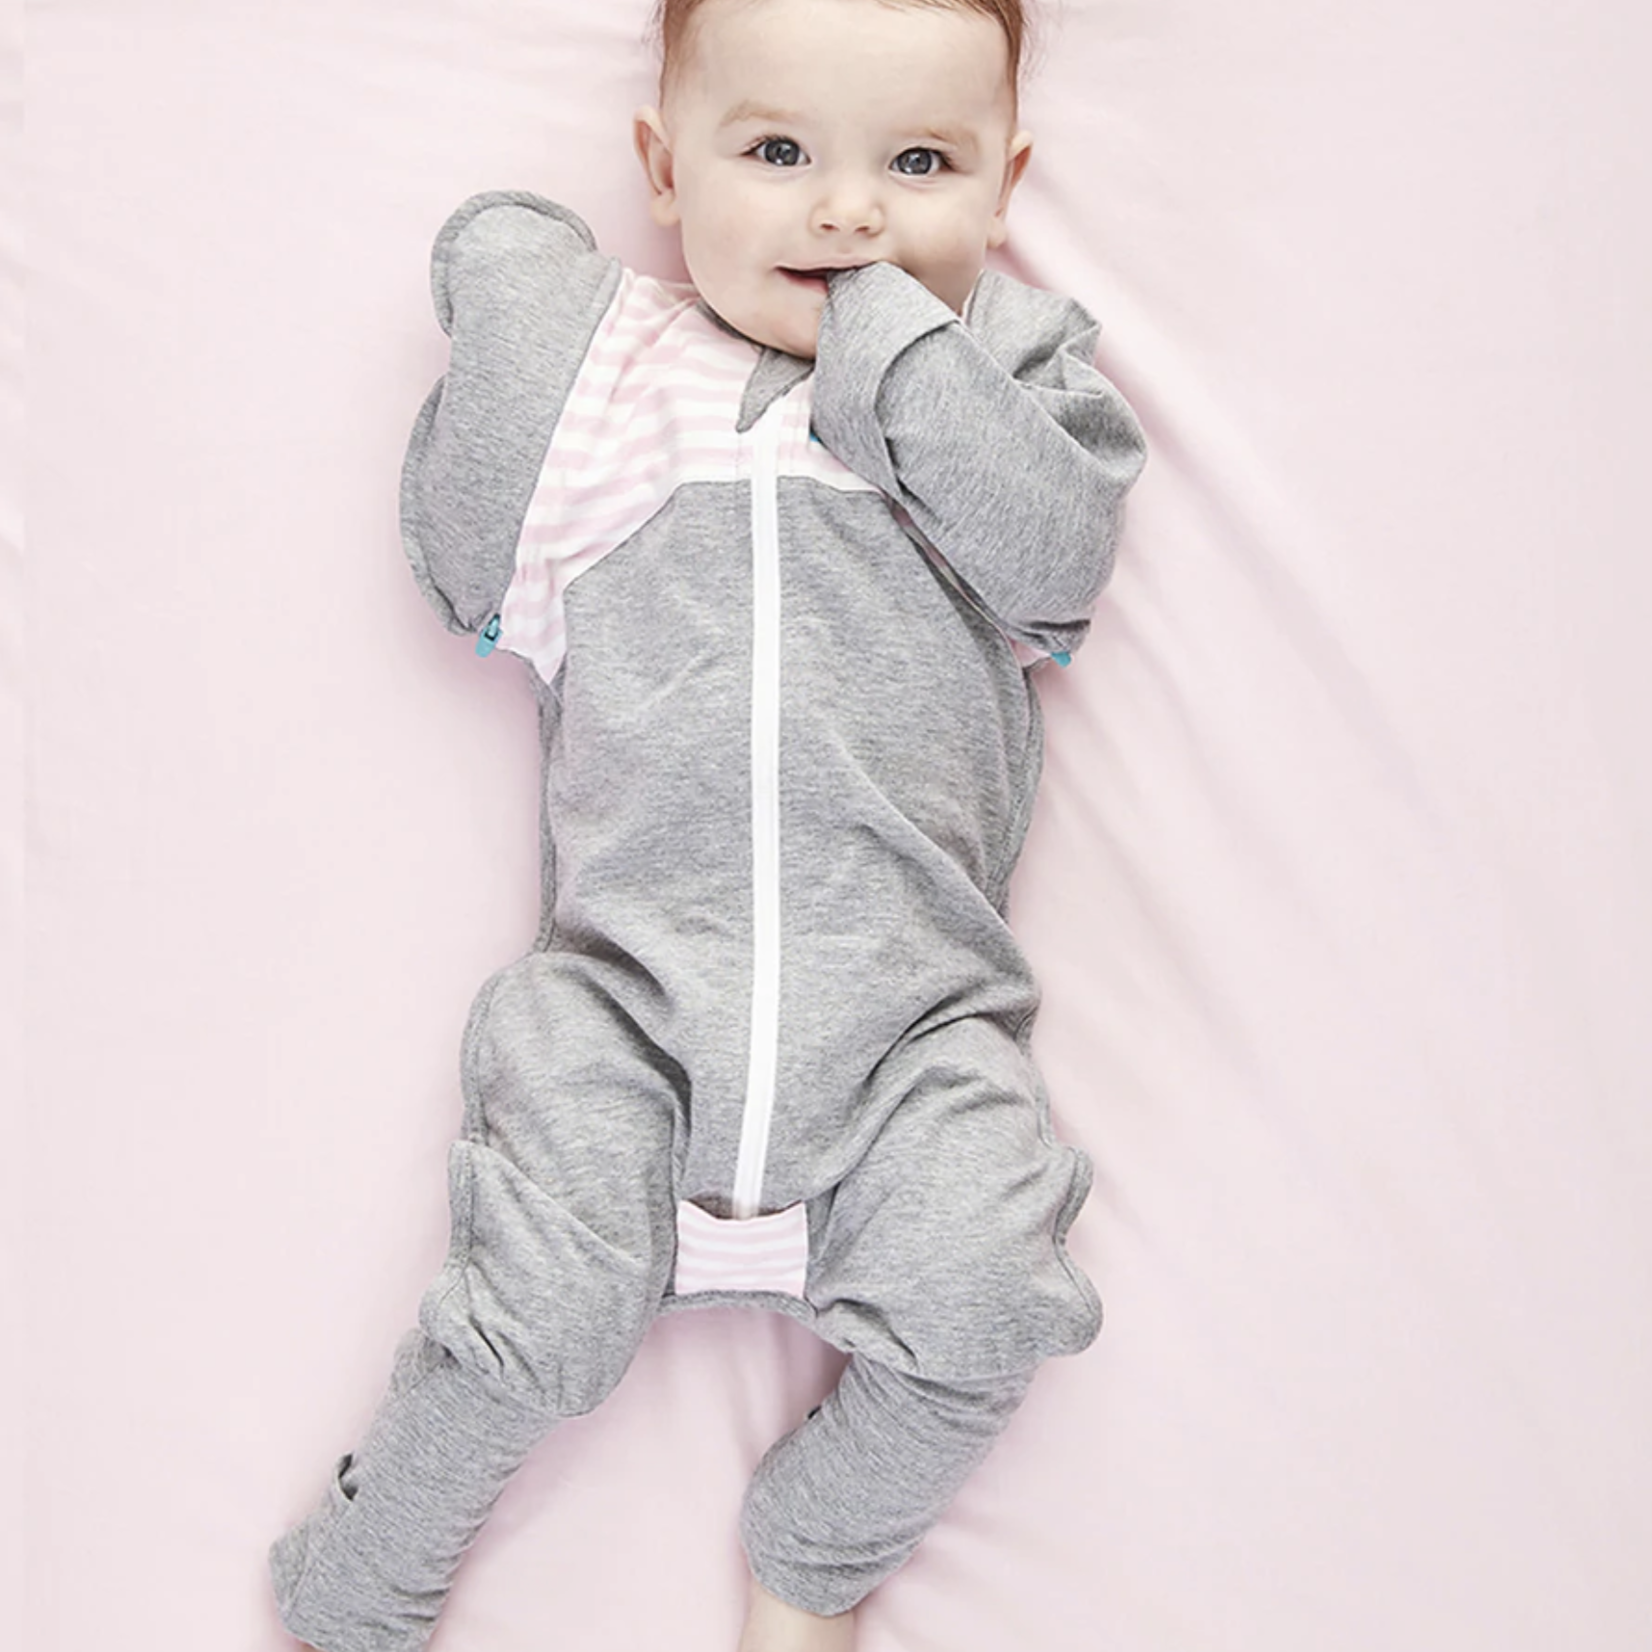 Transitioning Out of the Swaddle and Into Baby Merlin's Magic Sleepsui –  Baby Merlin's Magic Sleepsuit